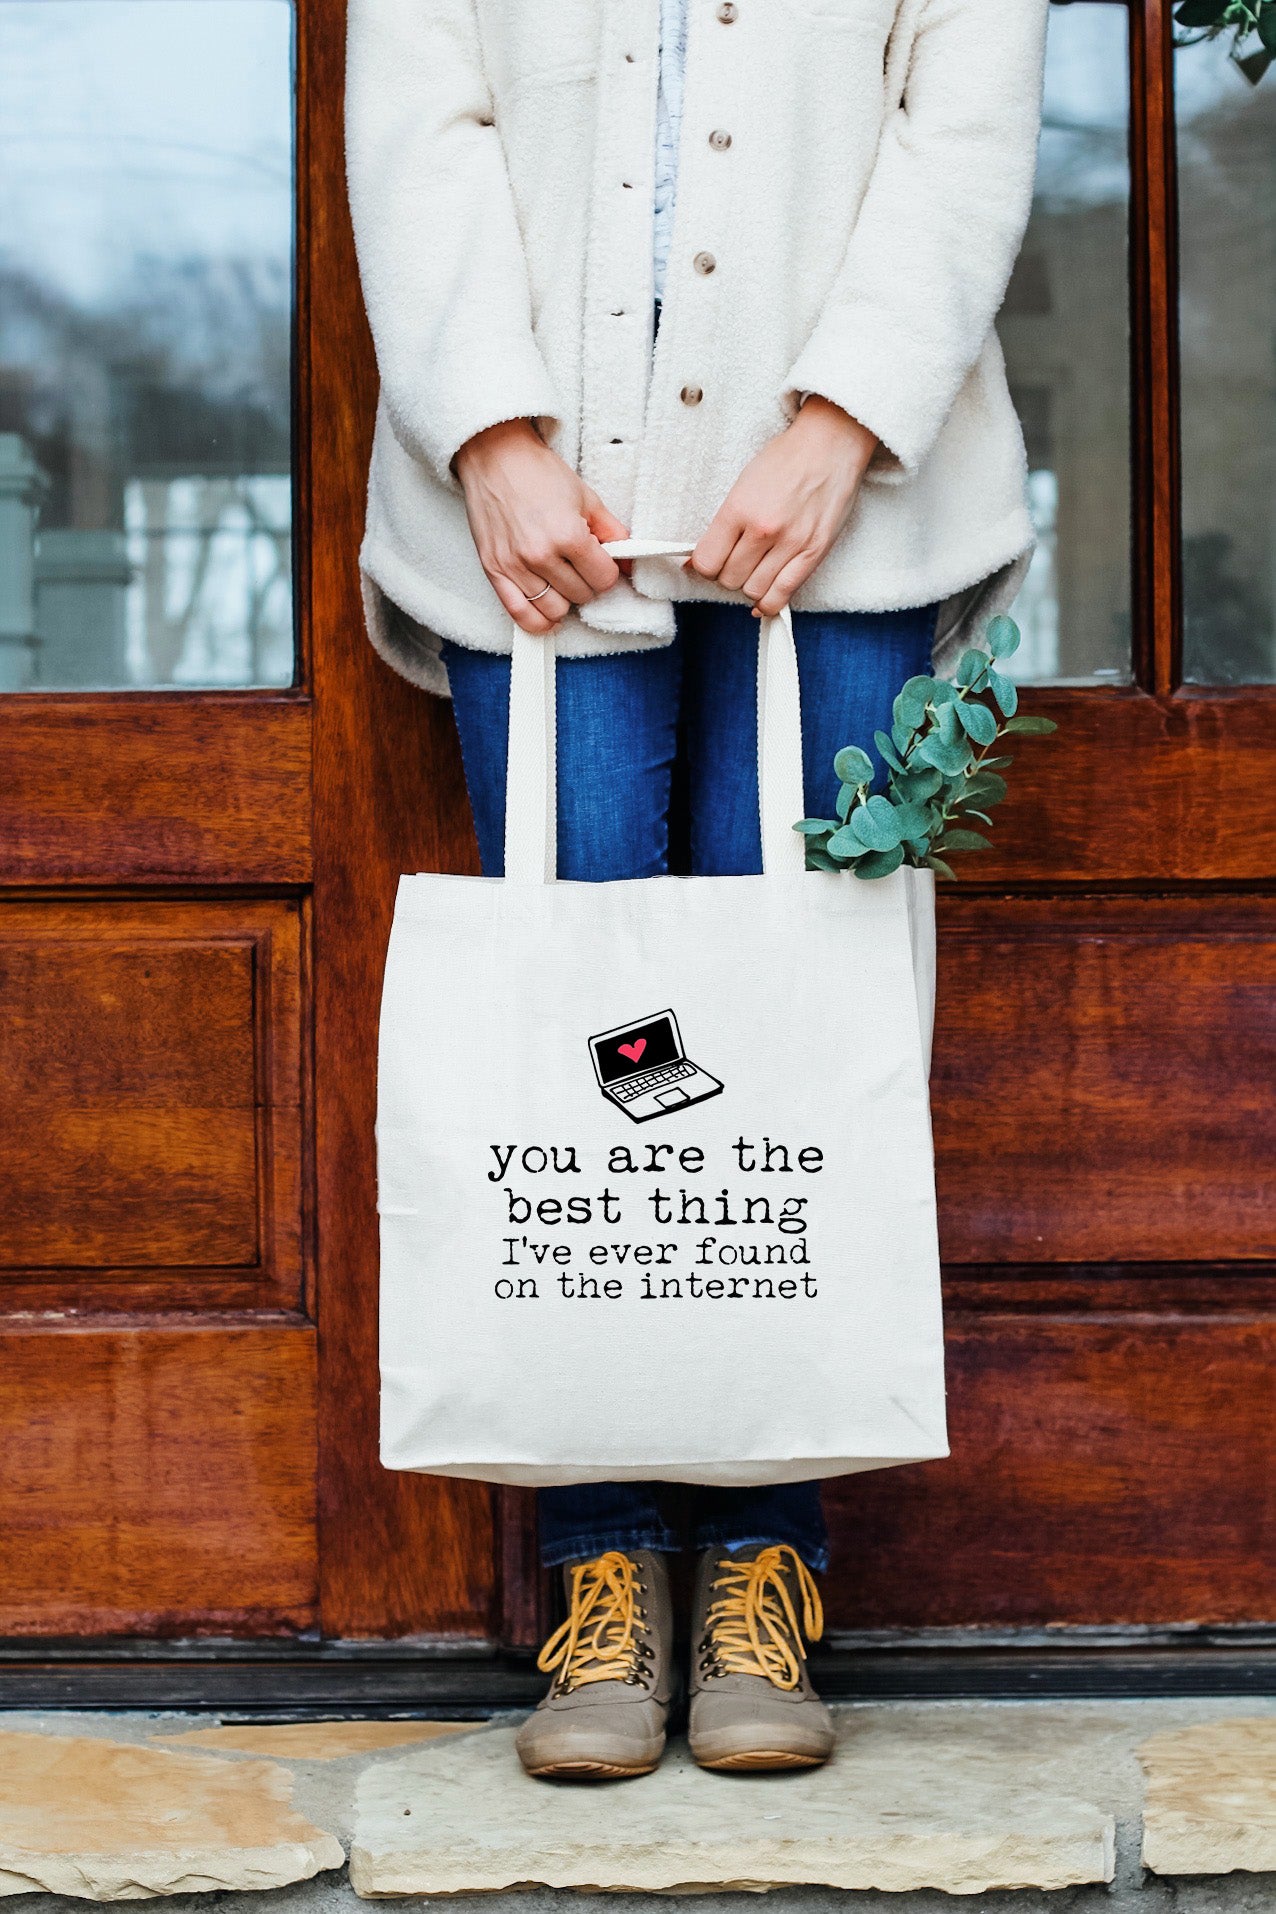 a woman holding a white bag that says you are the best thing on the internet